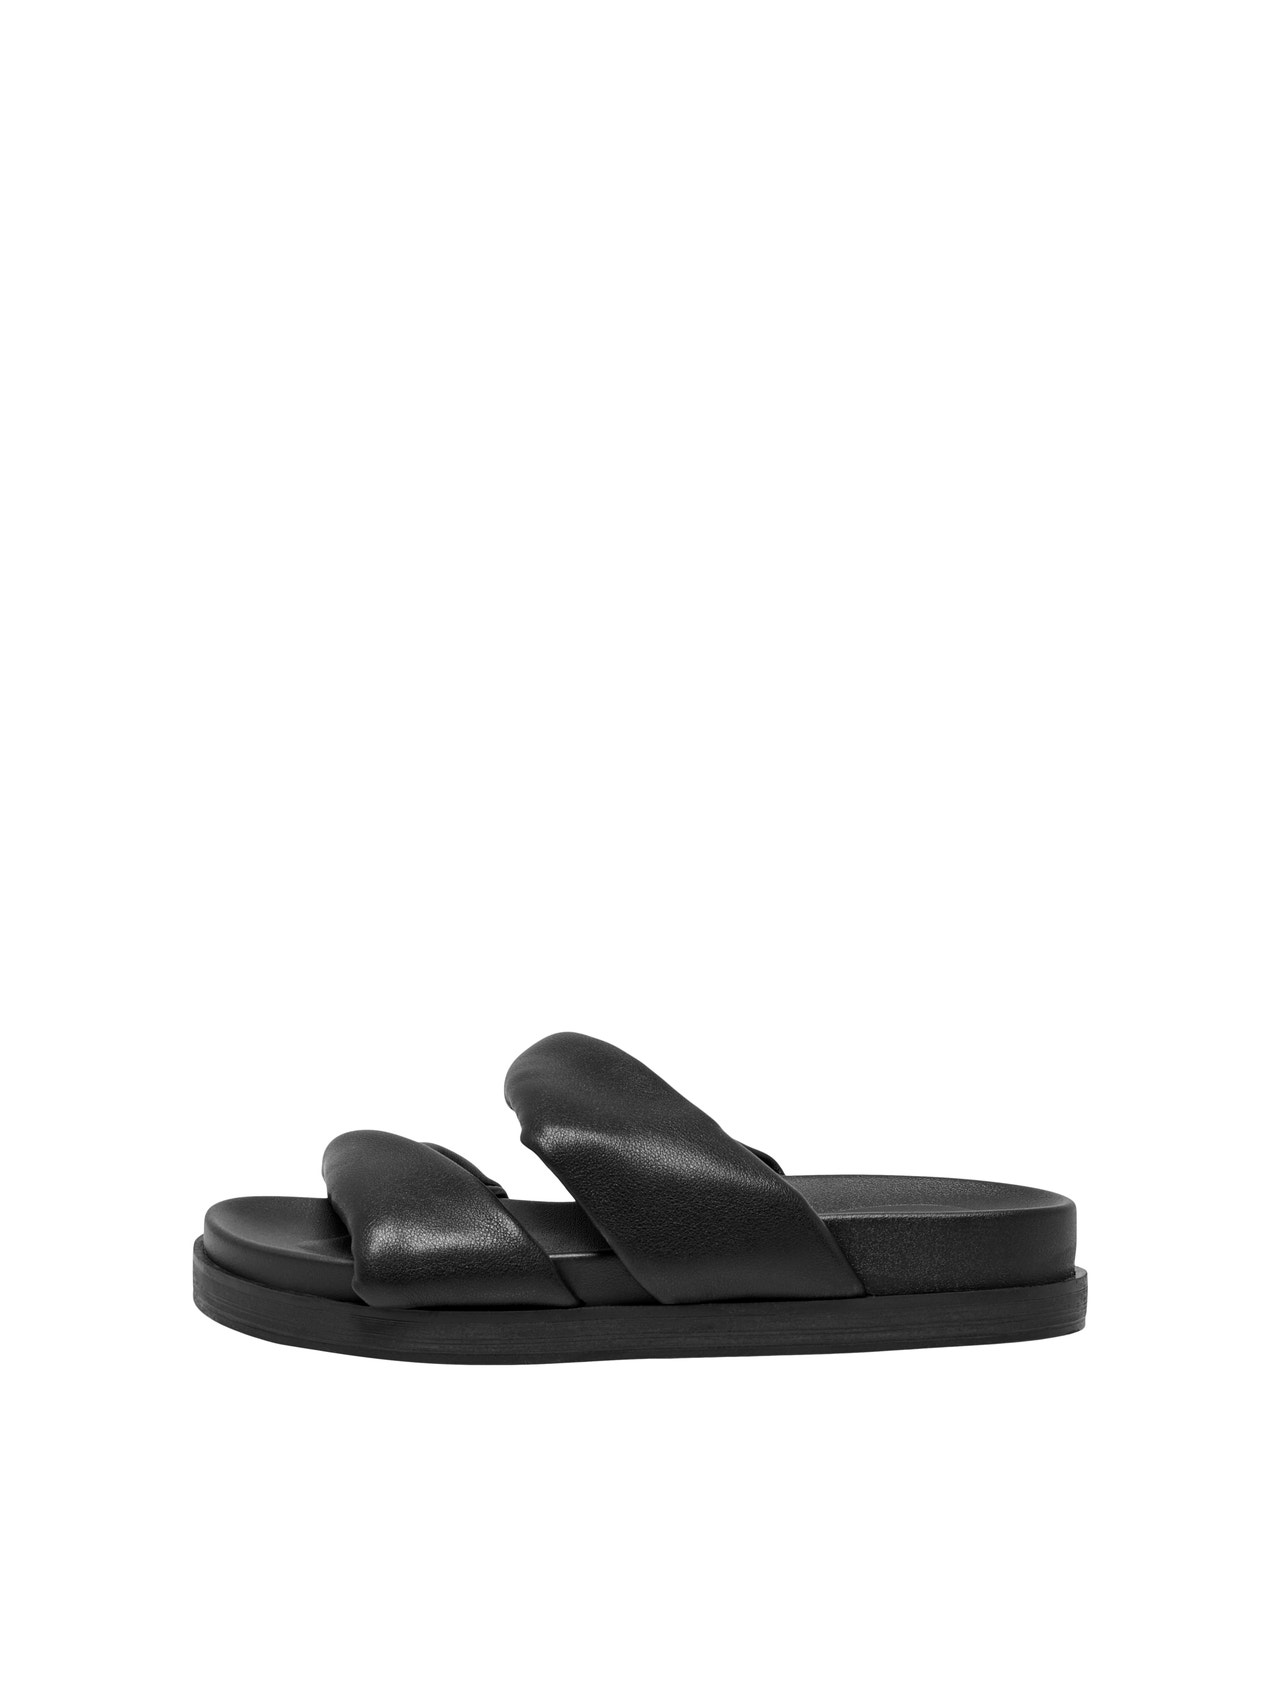 ONLY Faux leather sandals -Black - 15288132